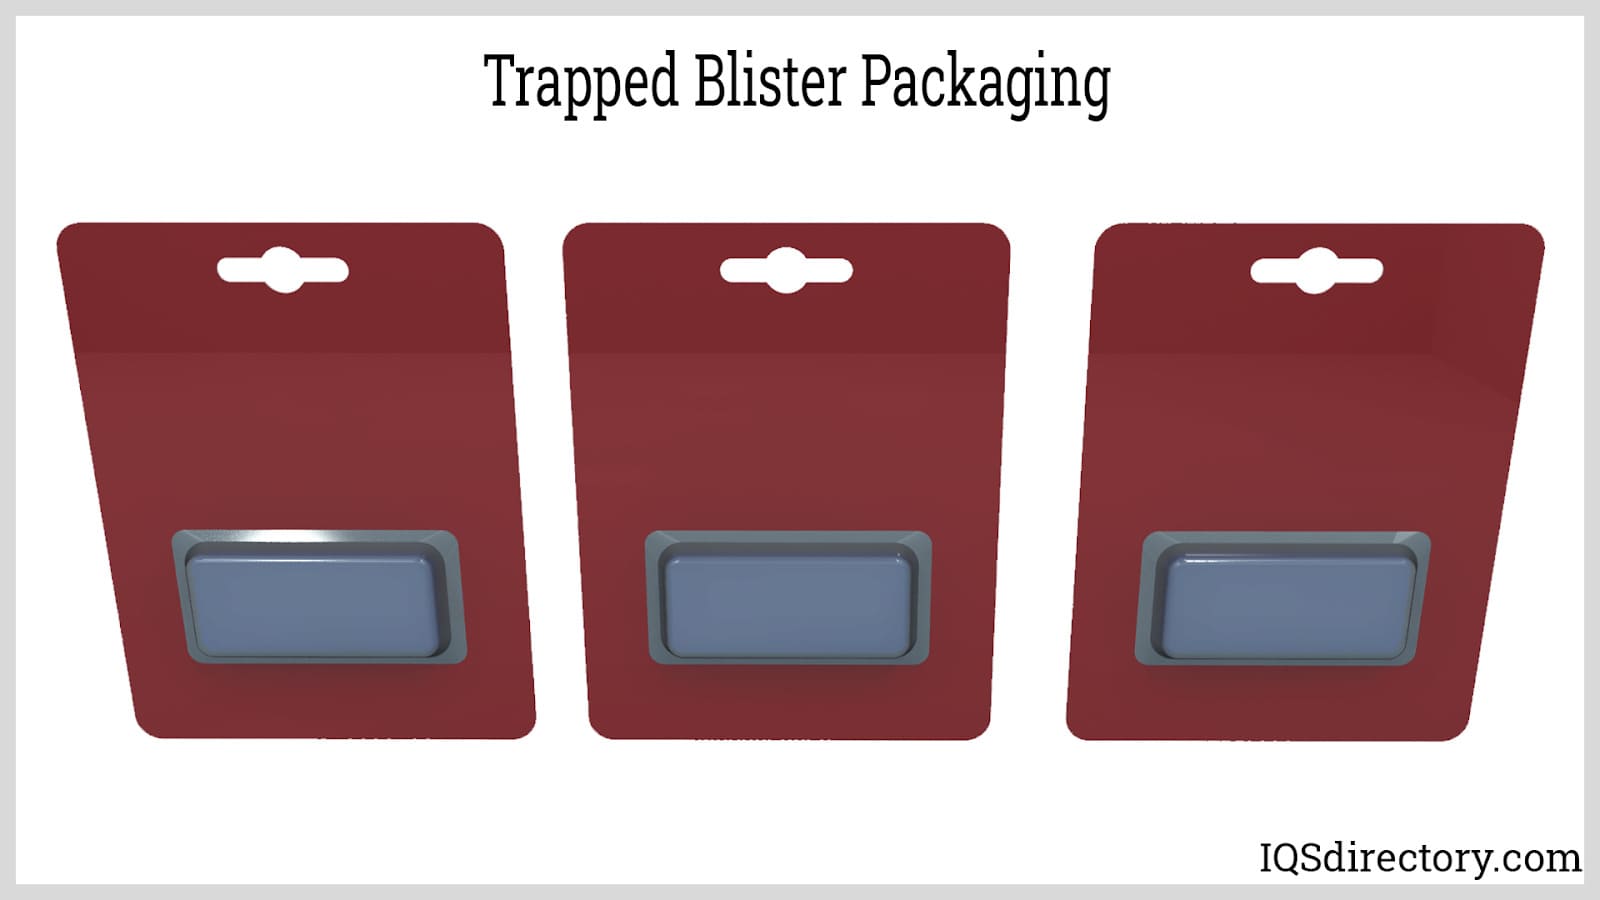 Trapped Blister Packaging